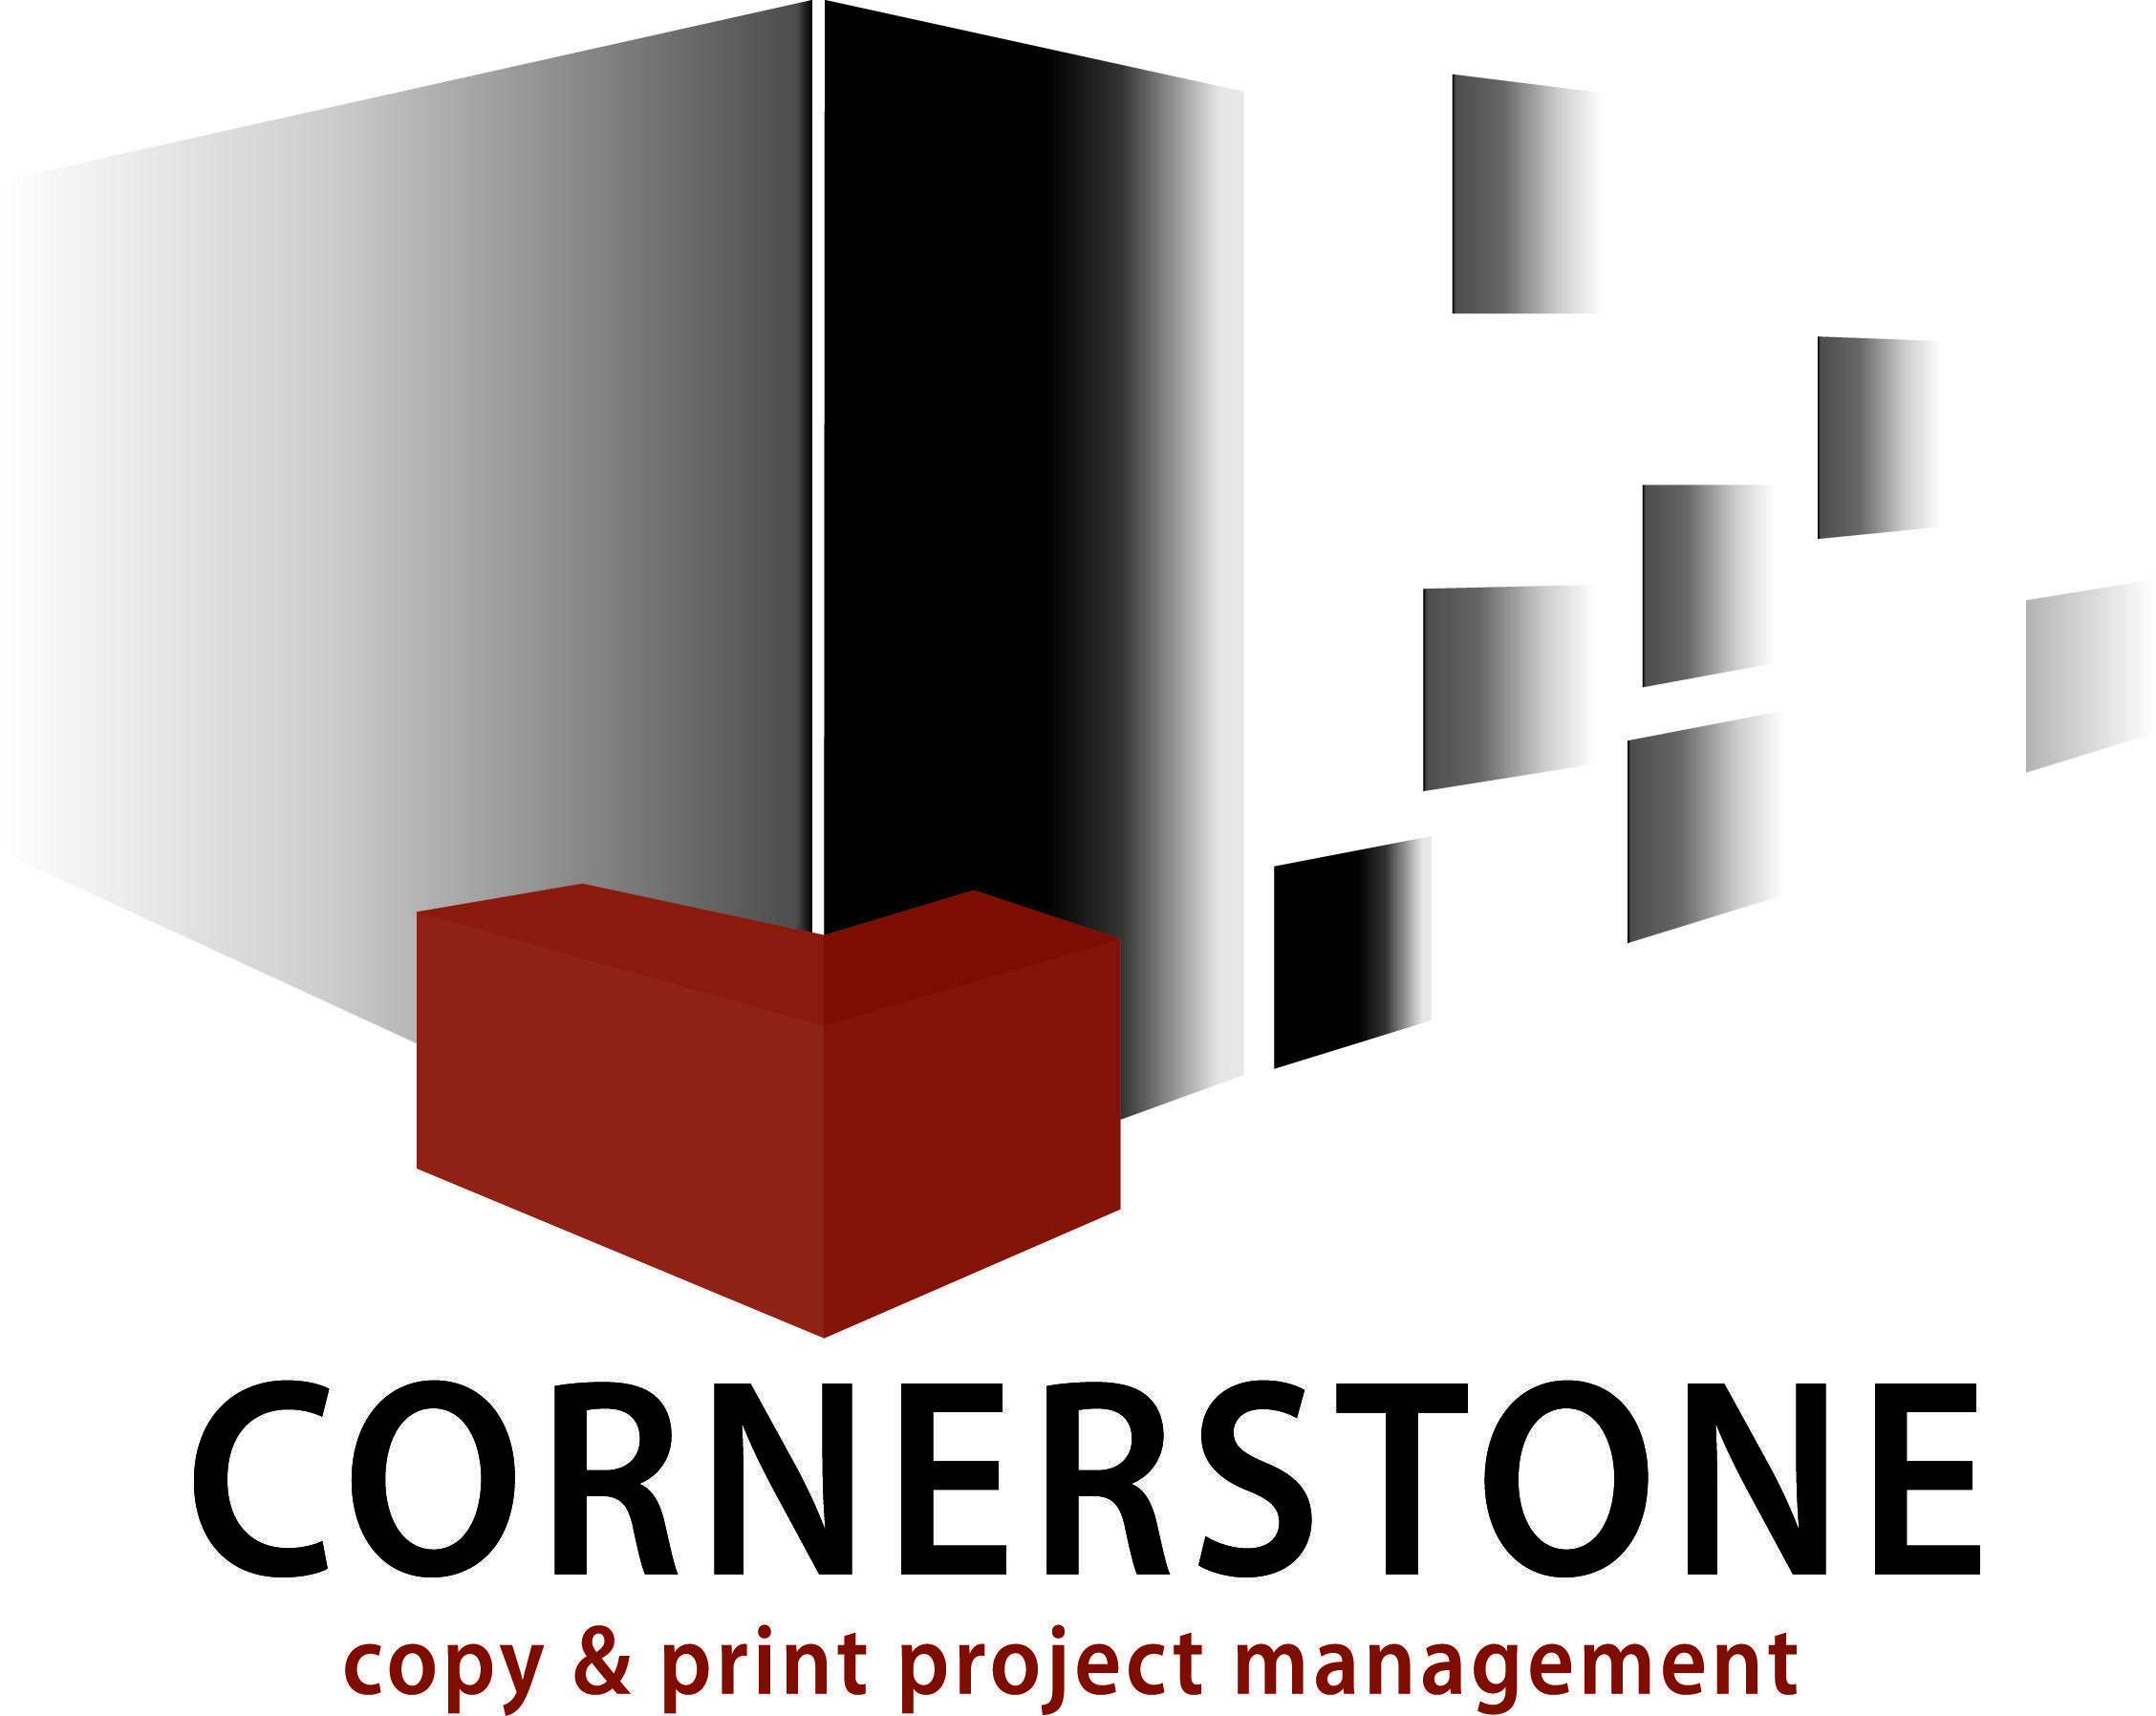 Cornerstone Logo - Cornerstone logo 1815 k with text outined - Project R.I.D.E. Inc.